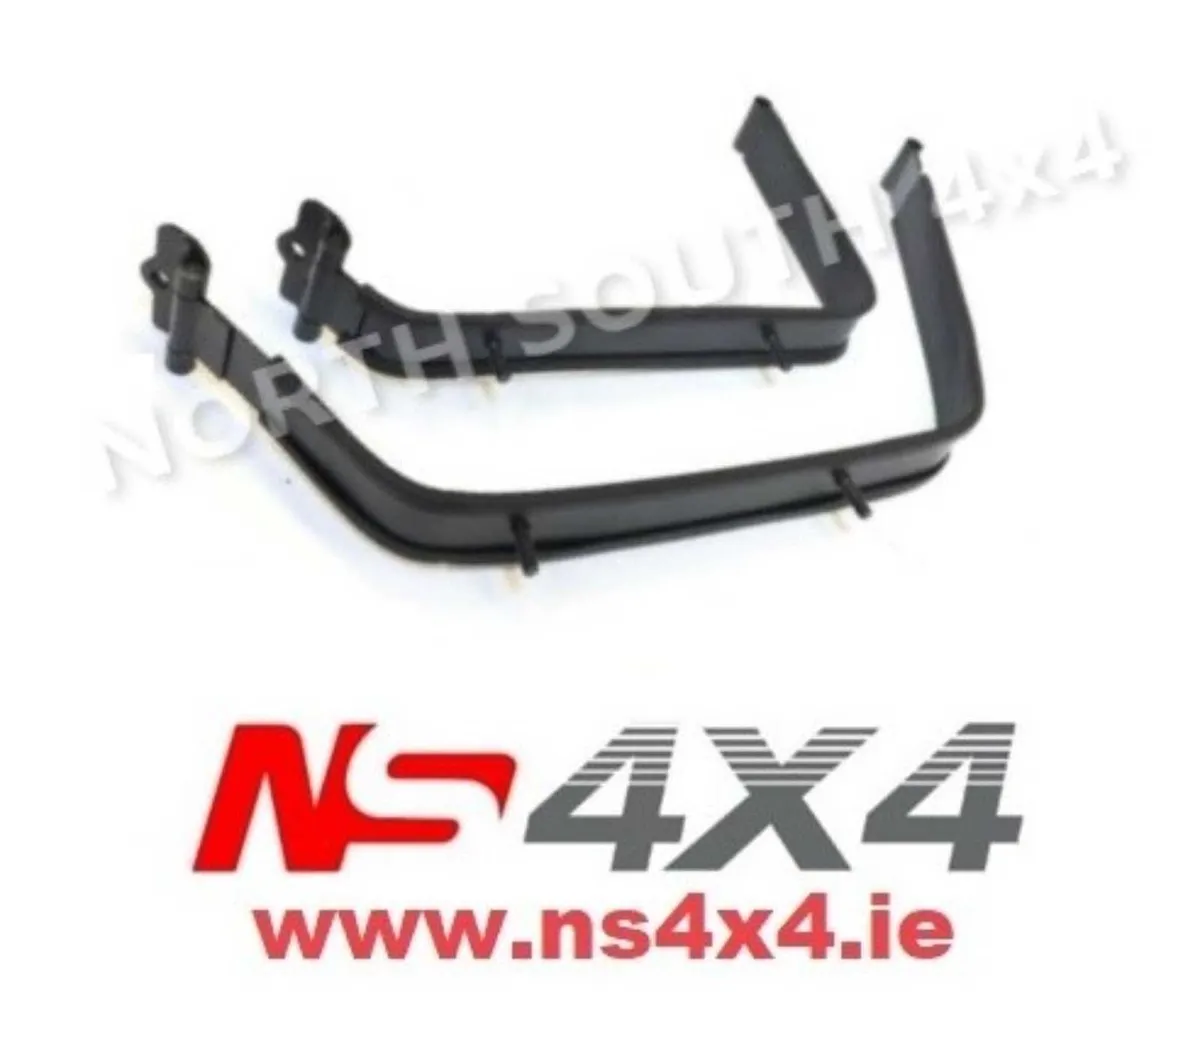 Fuel Tank Straps for Toyota Hilux - Image 1